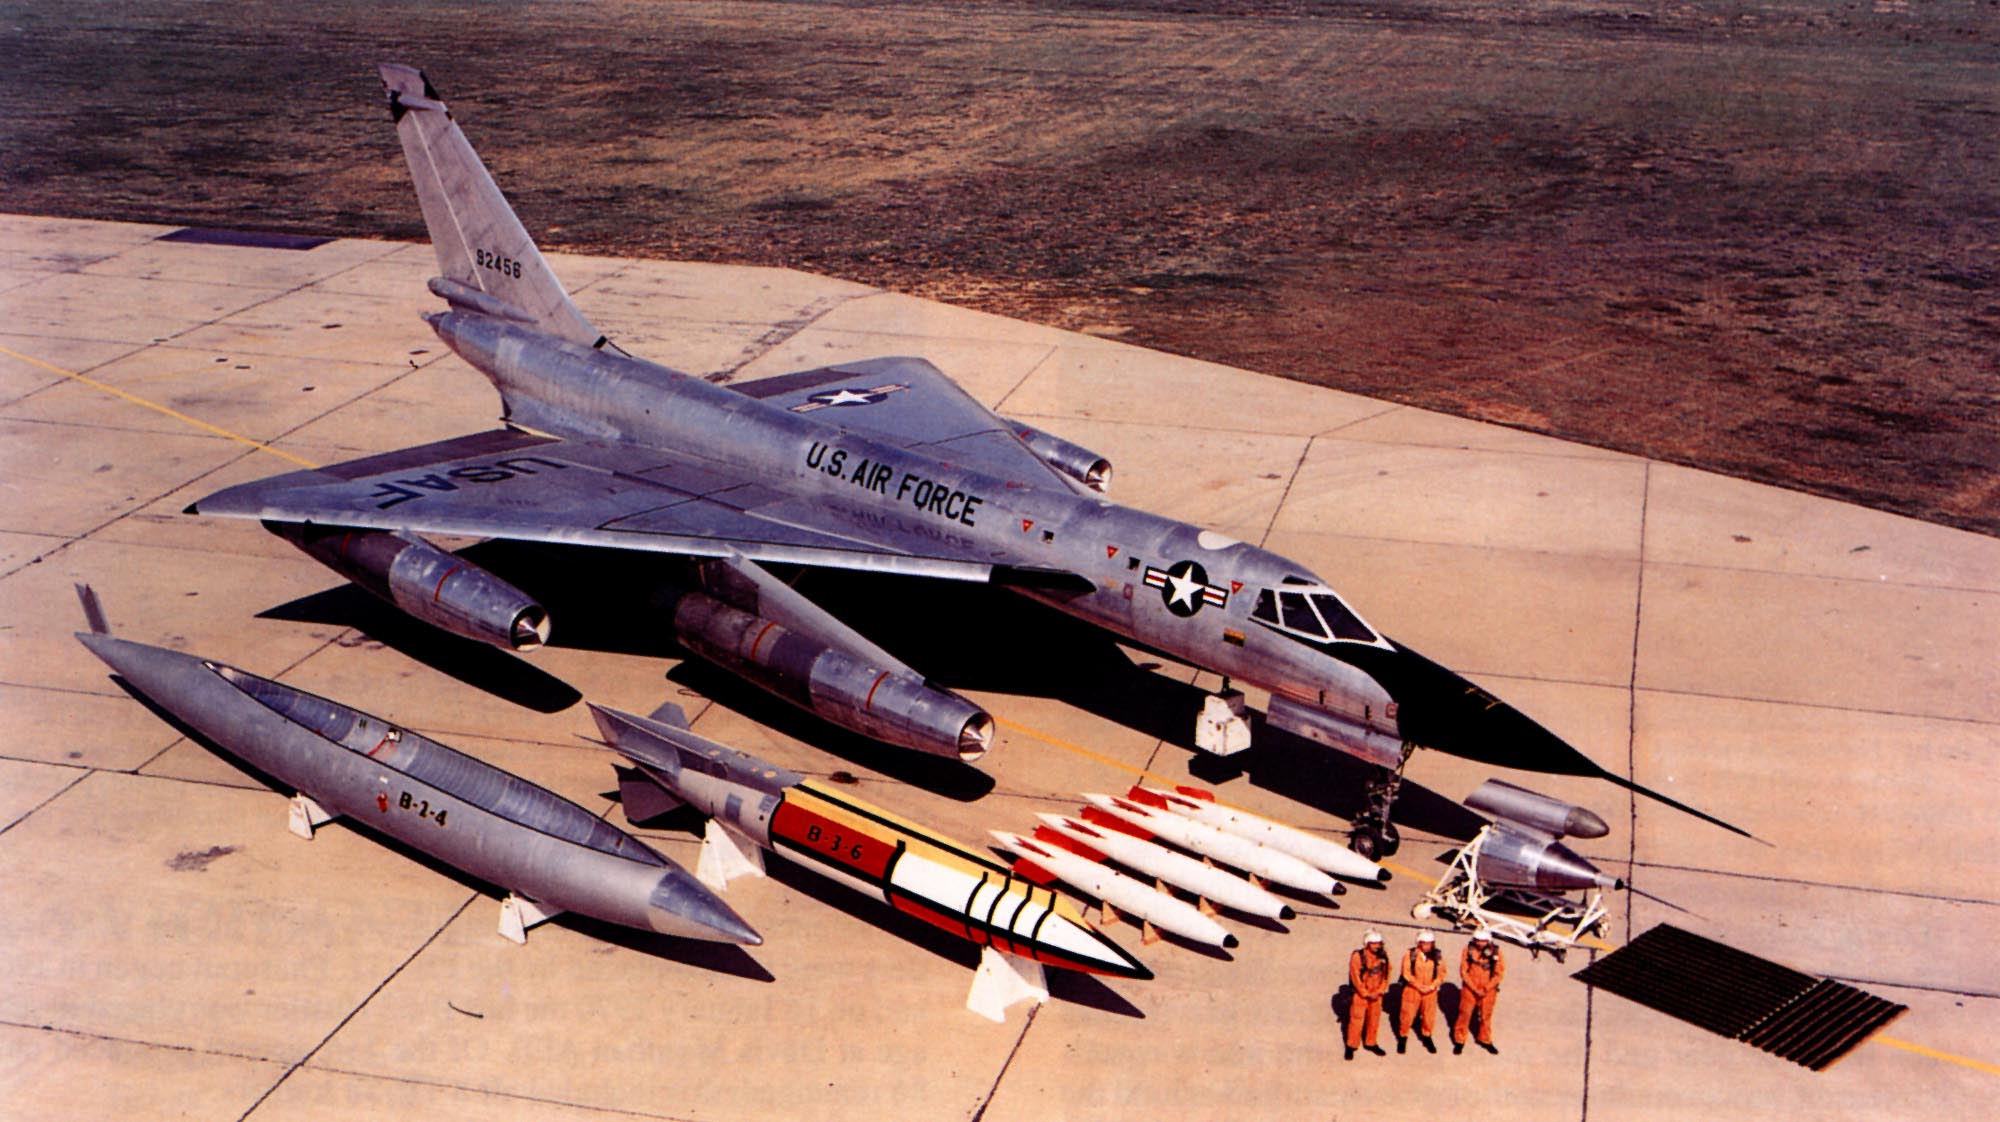 B-58A-10-CF 59-2456 with typical weapons load: Four 1-megaton B43 thermonuclear bombs for high-speed, low-altitude laydown delivery; one W39 3–4 megaton thermonuclear bomb carried in the centerline weapons/fuel pod, one 20 mm M61 rotary cannon with x,xxx rounds of ammunition. (U.S. Air Force)